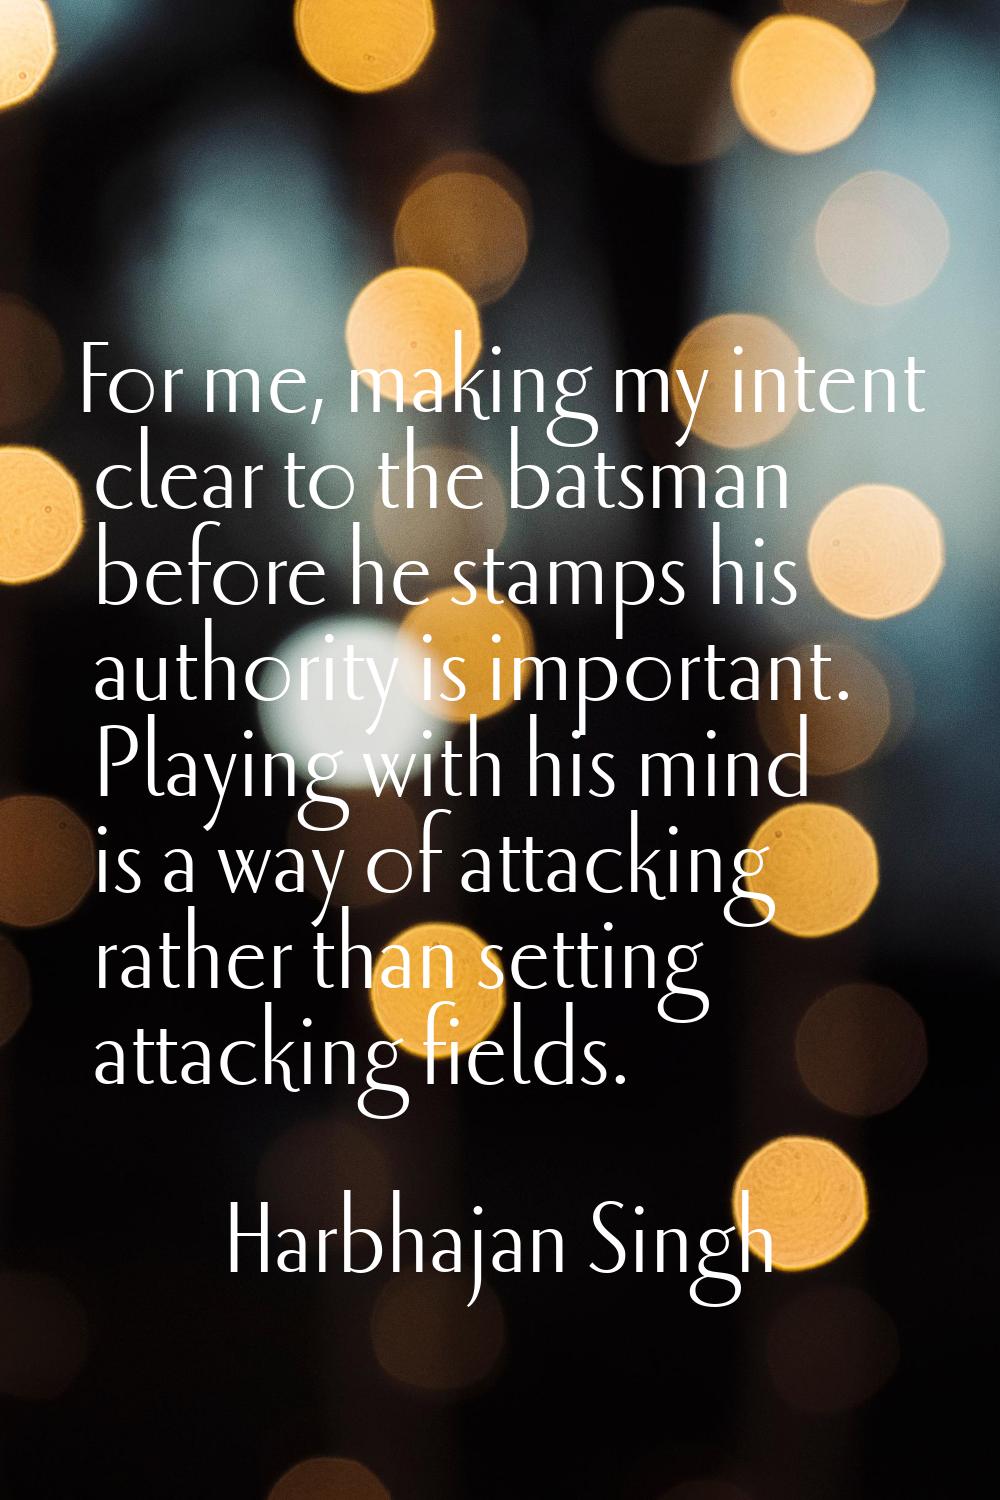 For me, making my intent clear to the batsman before he stamps his authority is important. Playing 